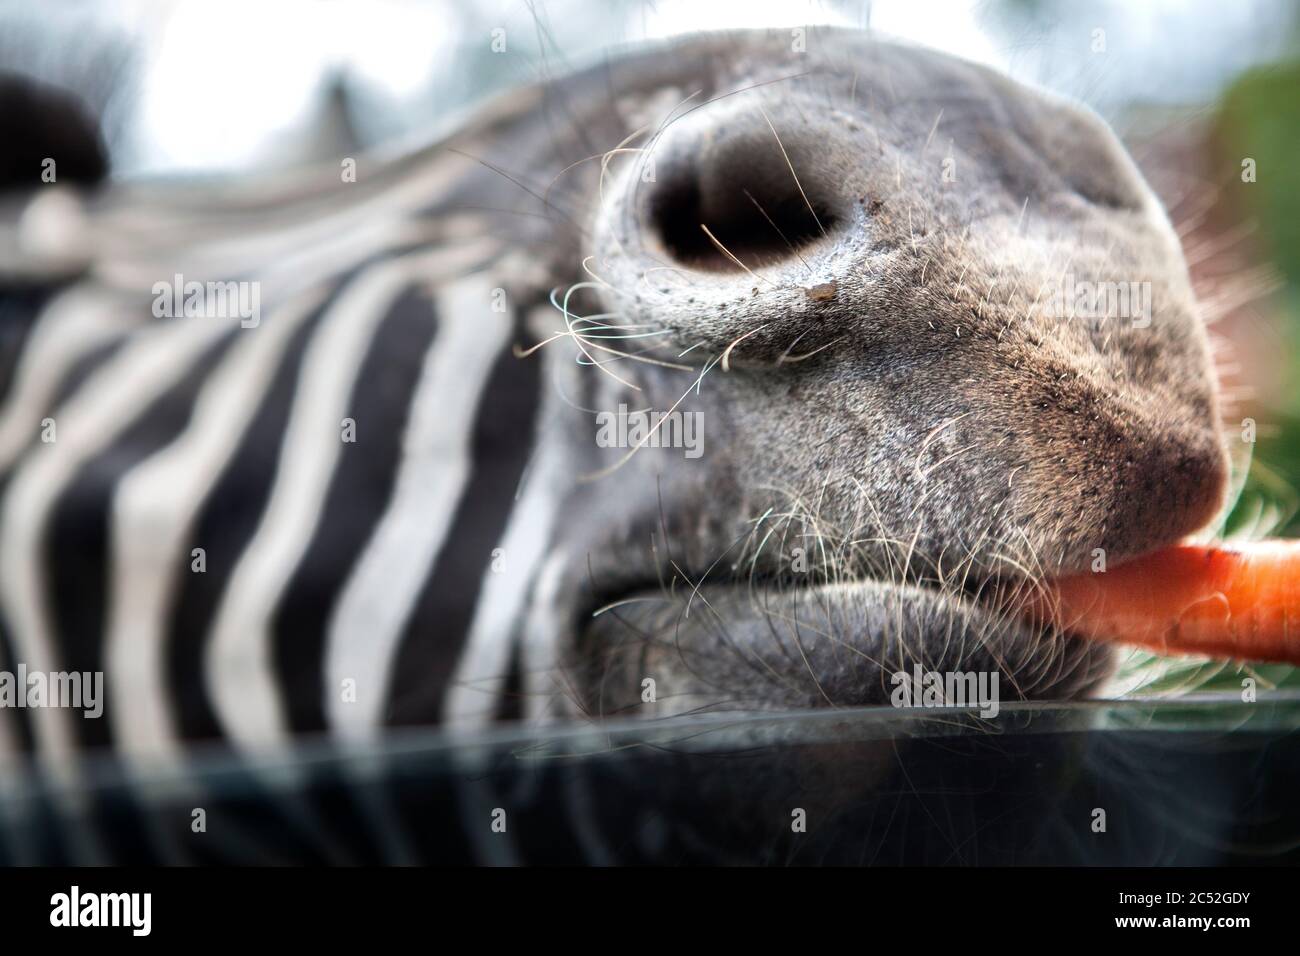 Close-up of a zebra eating a carrot, Indonesia Stock Photo